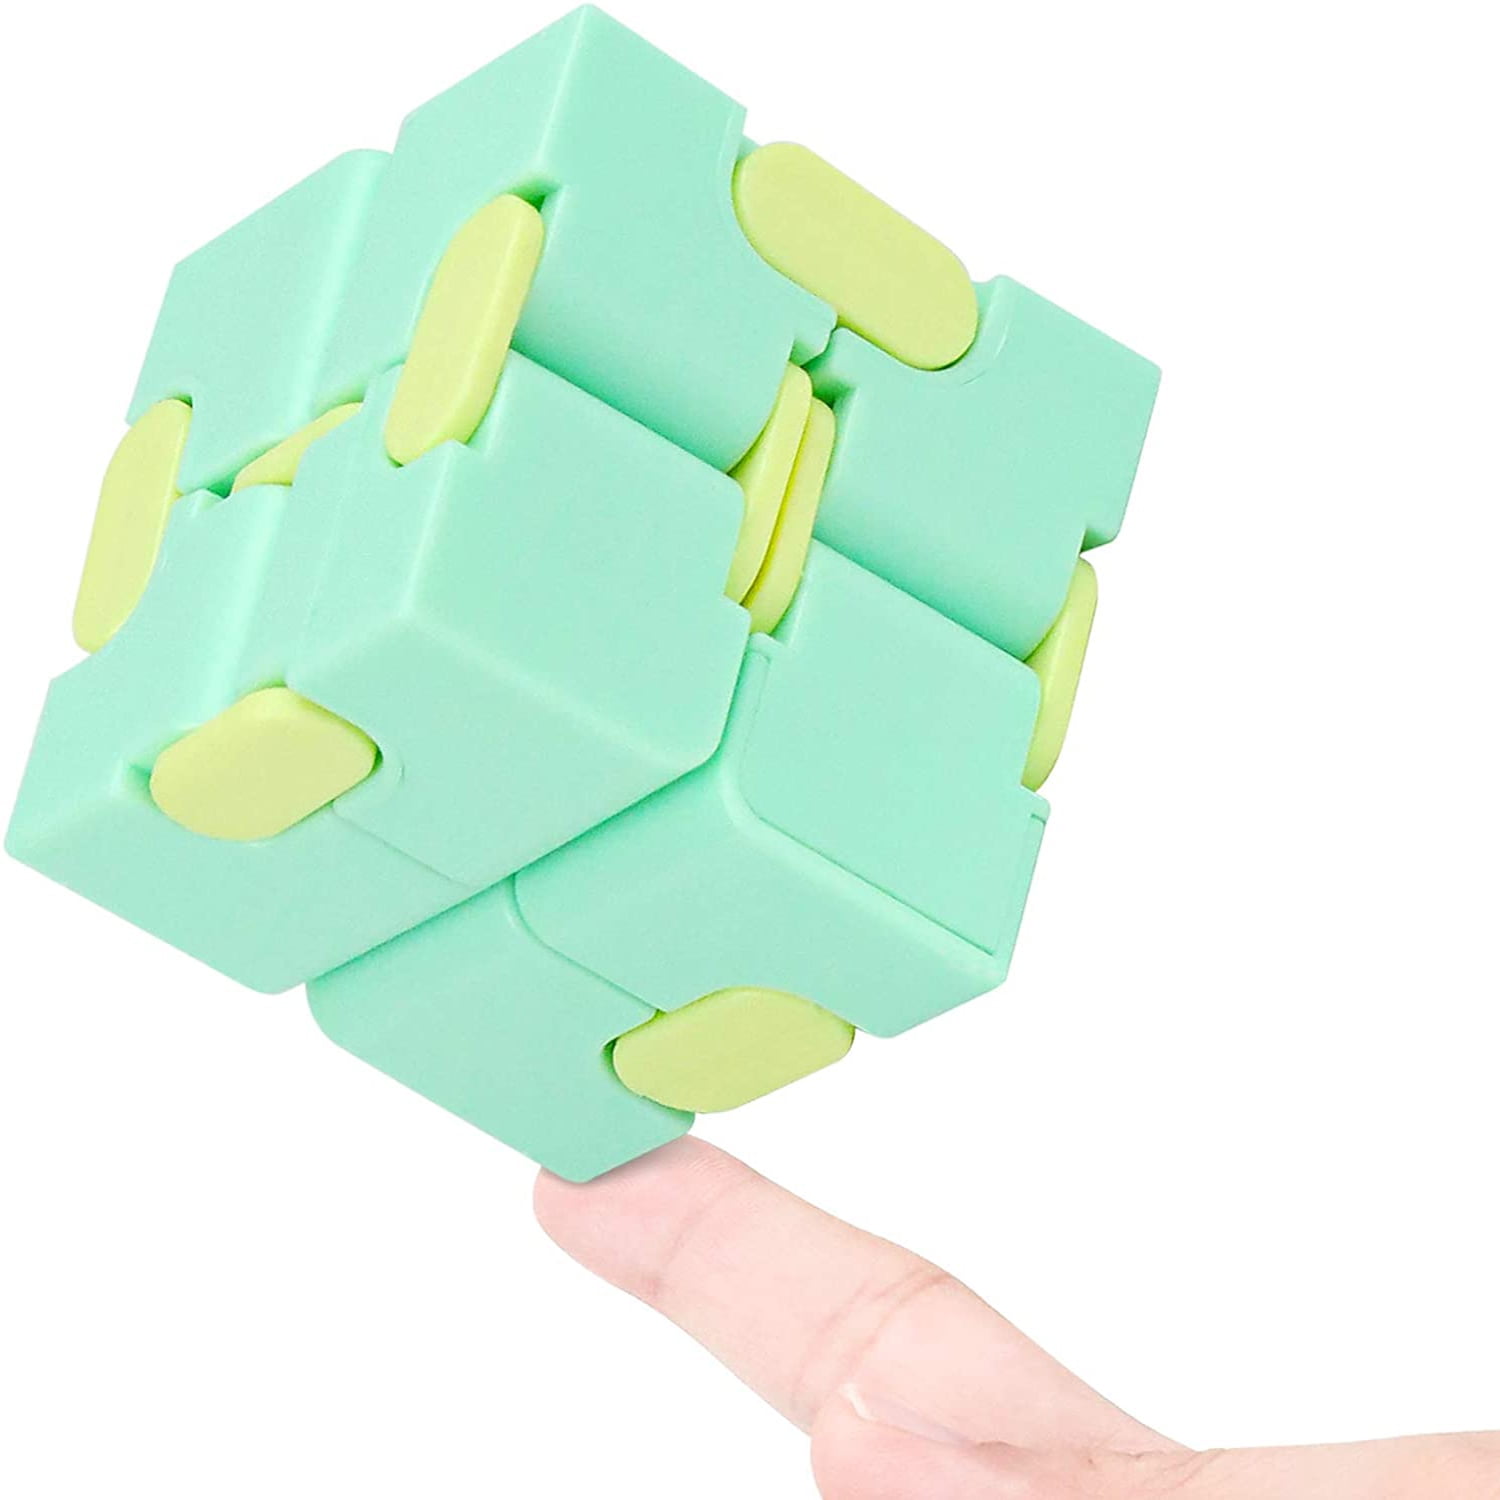 Honmofun Infinity Cube Fidget Toy Luxury EDC Fidgeting Game for Kids and Adults Cool Mini Gadget Spinner Best for Stress and Anxiety Relief and Kill Time Unique Idea ADHD Ultra Durable Cube 